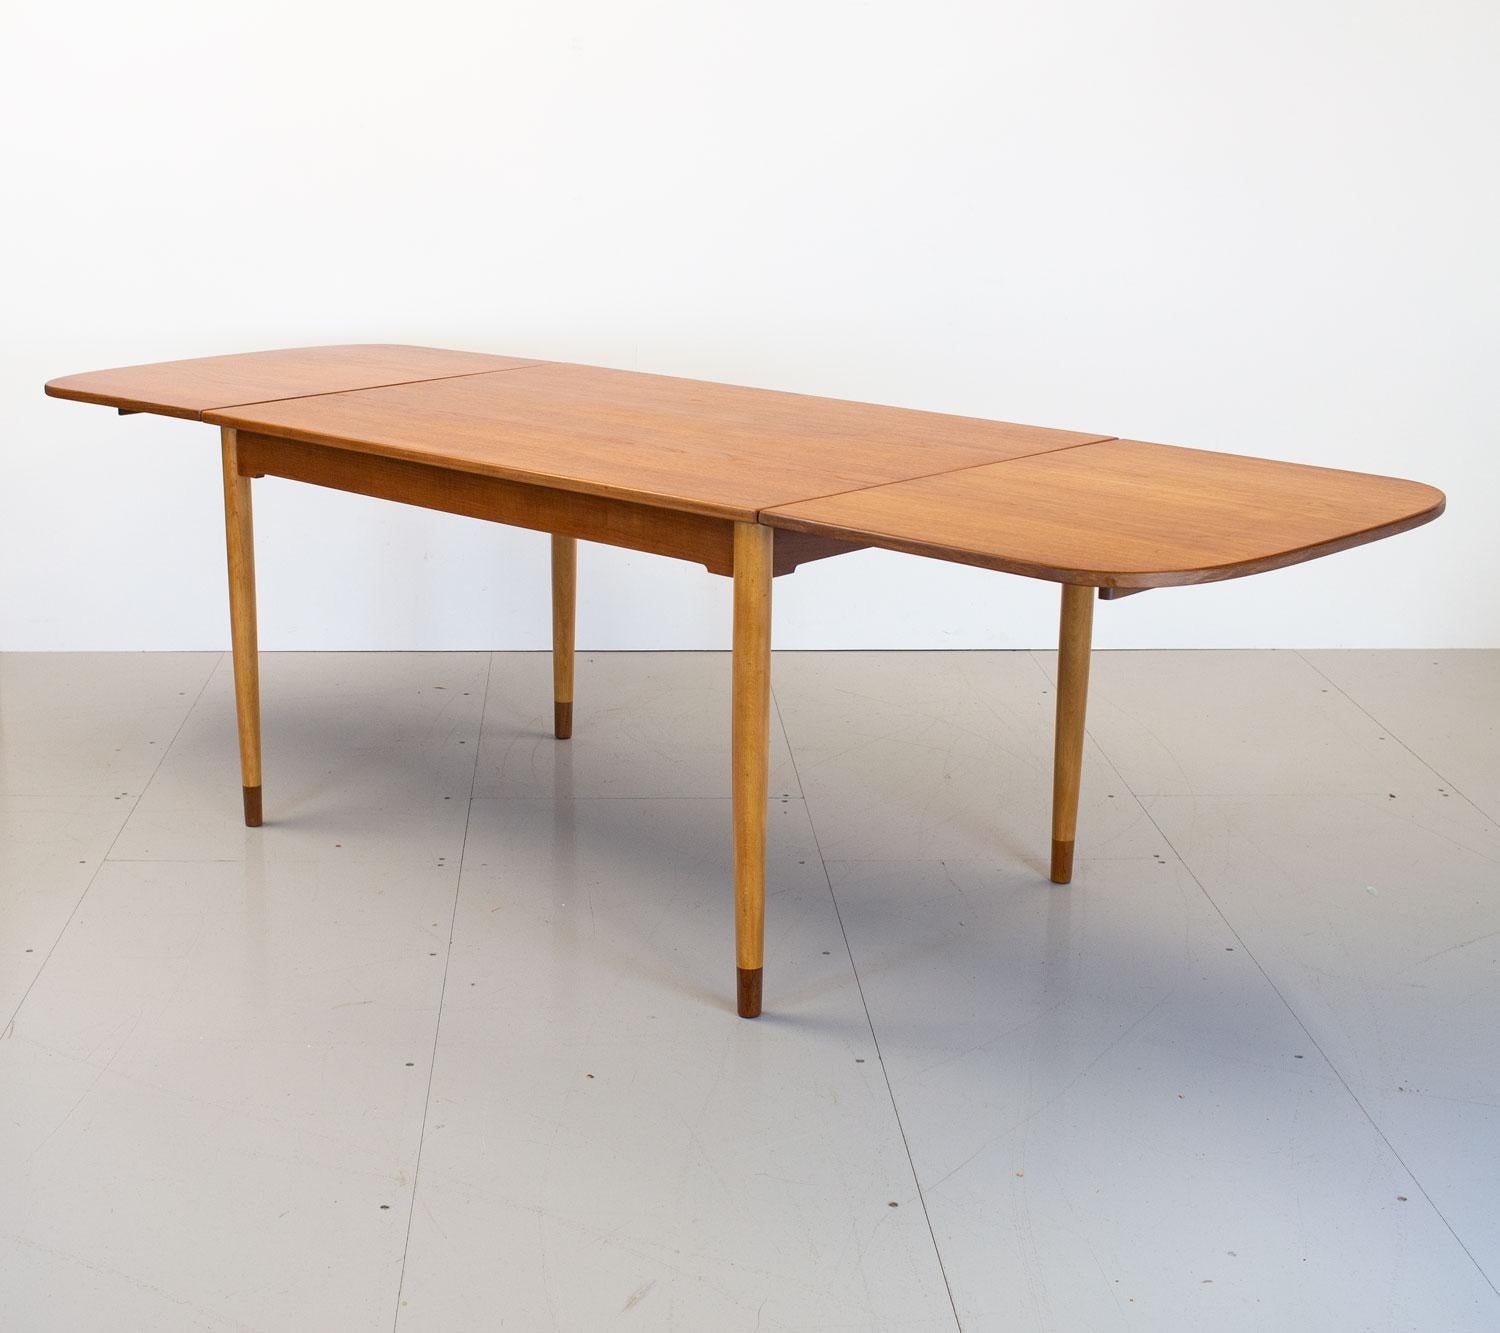 1950s Danish teak drop leaf dining table designed by Børge Mogensen for Søborg Møbelfabrik. This practical dining table can seat 4 people when closed and up to 10 people when fully extended by the drop down leaves that are held in place with pull